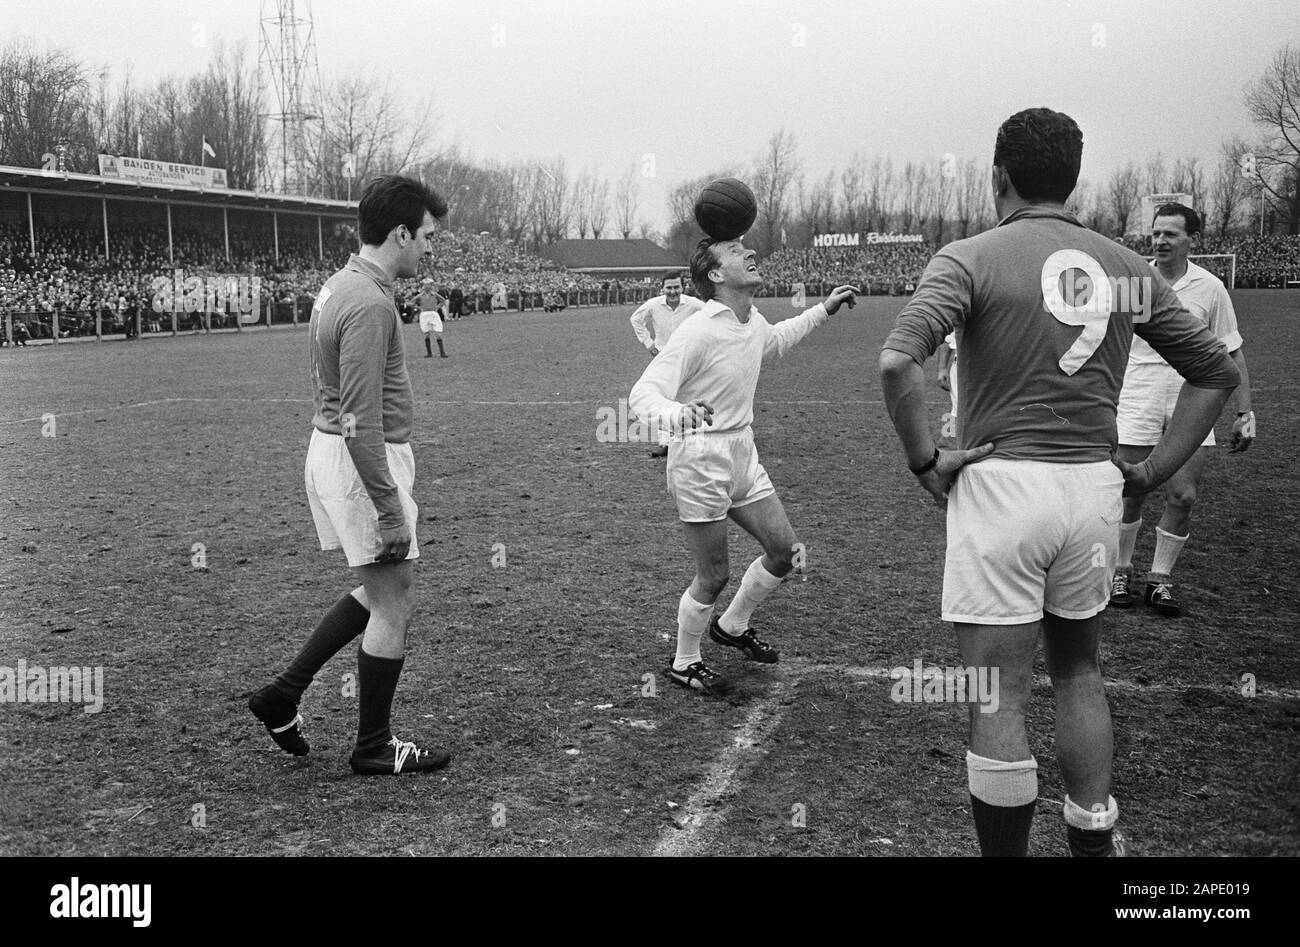 Artists soccer in The Hague, Moments from the match Date: March 14, 1965 Location: The Hague, South Holland Keywords: artists, sports, football Stock Photo